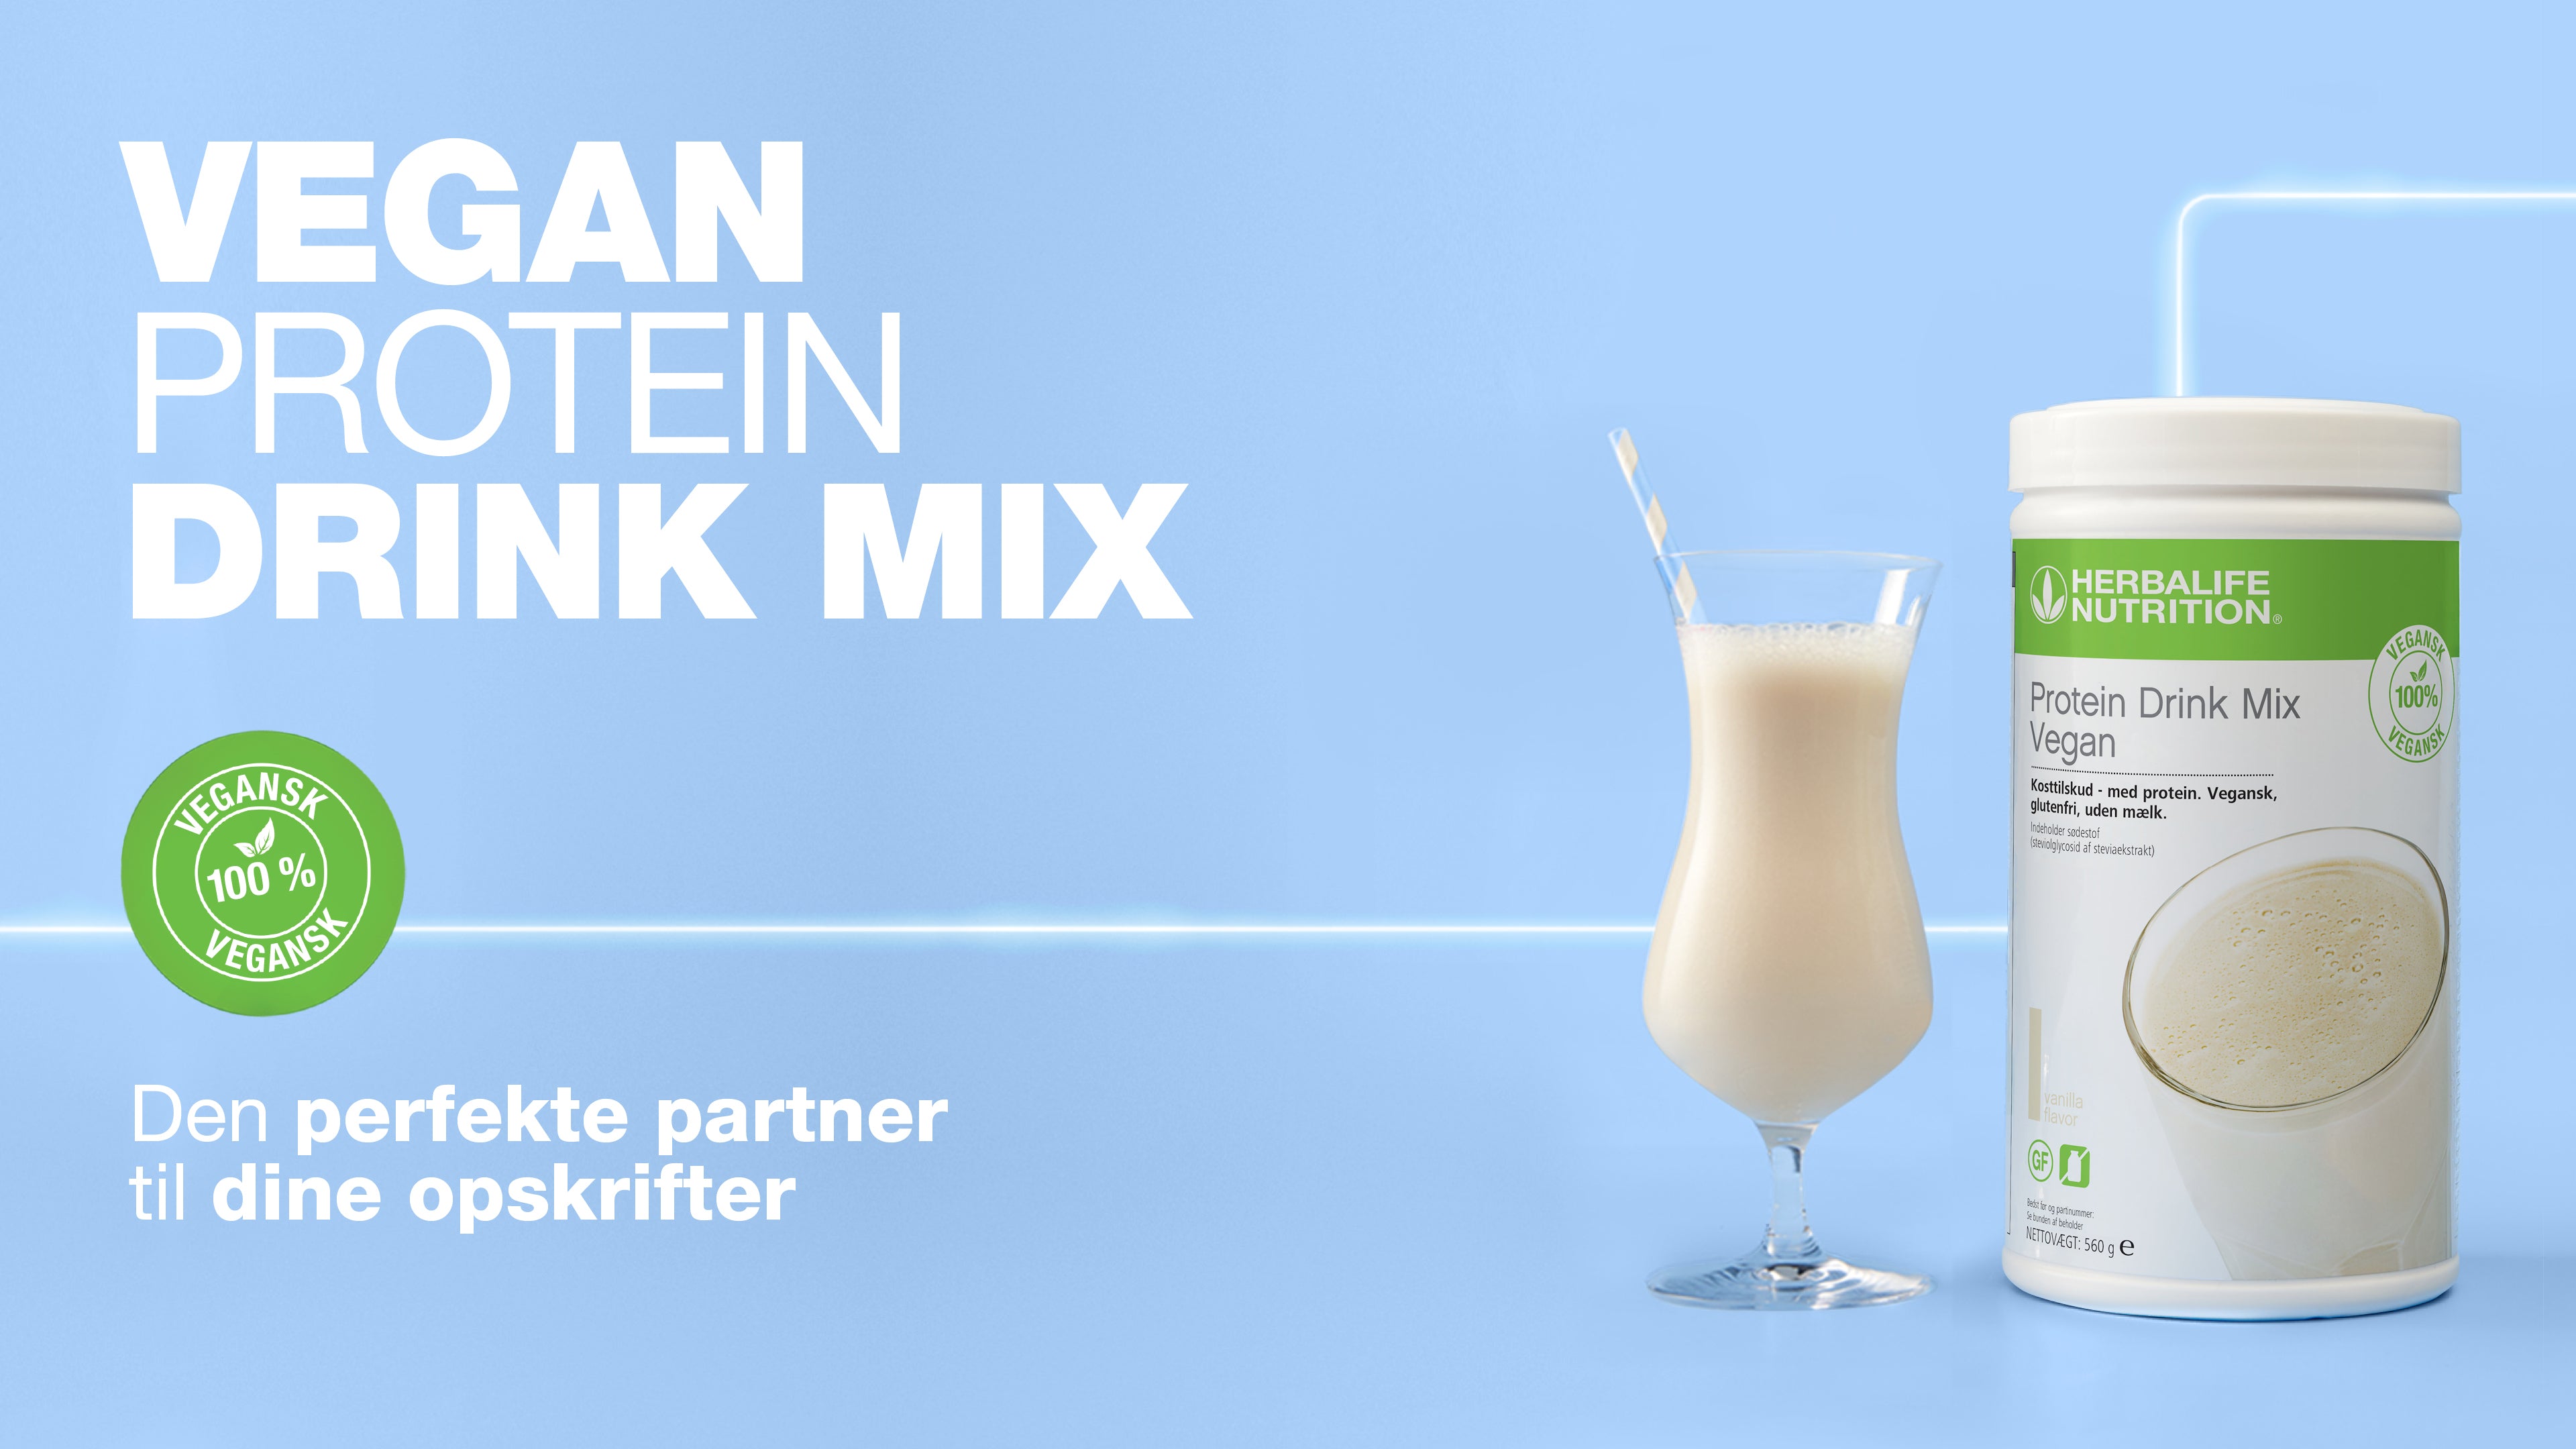 Protein Drink Mix (PDM)